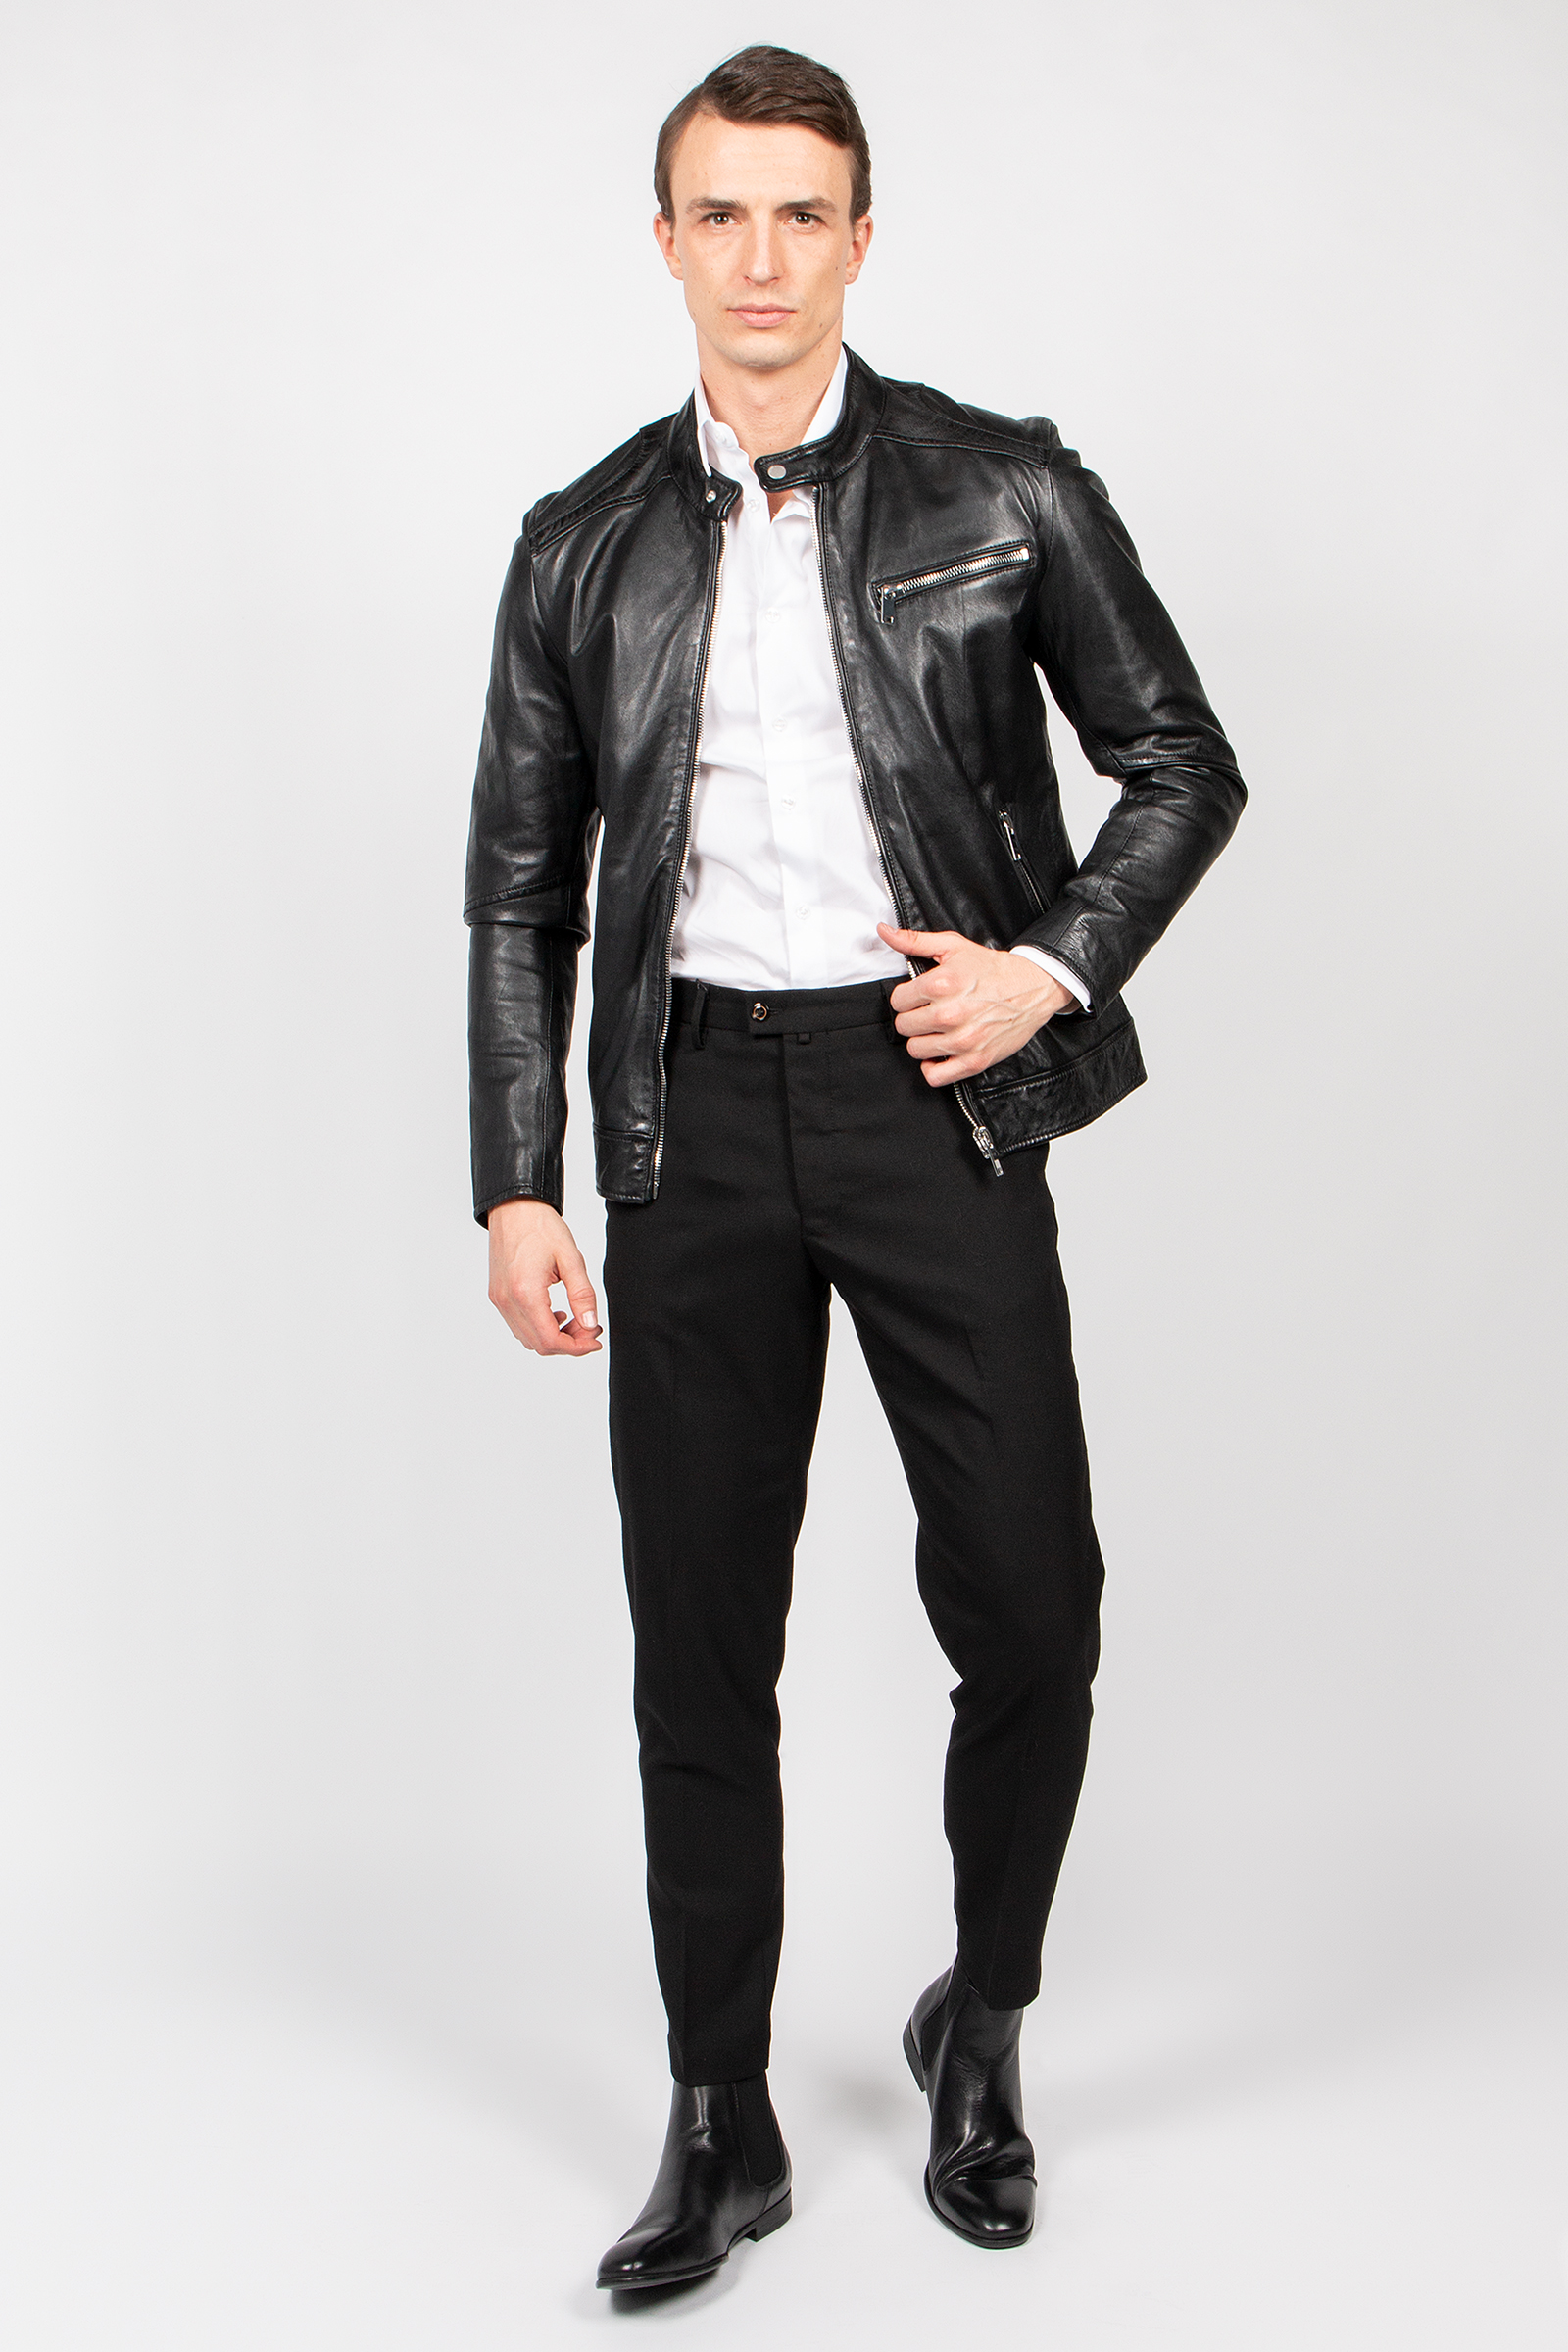 Jim-FN Freaky Nation | Jackets Lucky Men | | Leather